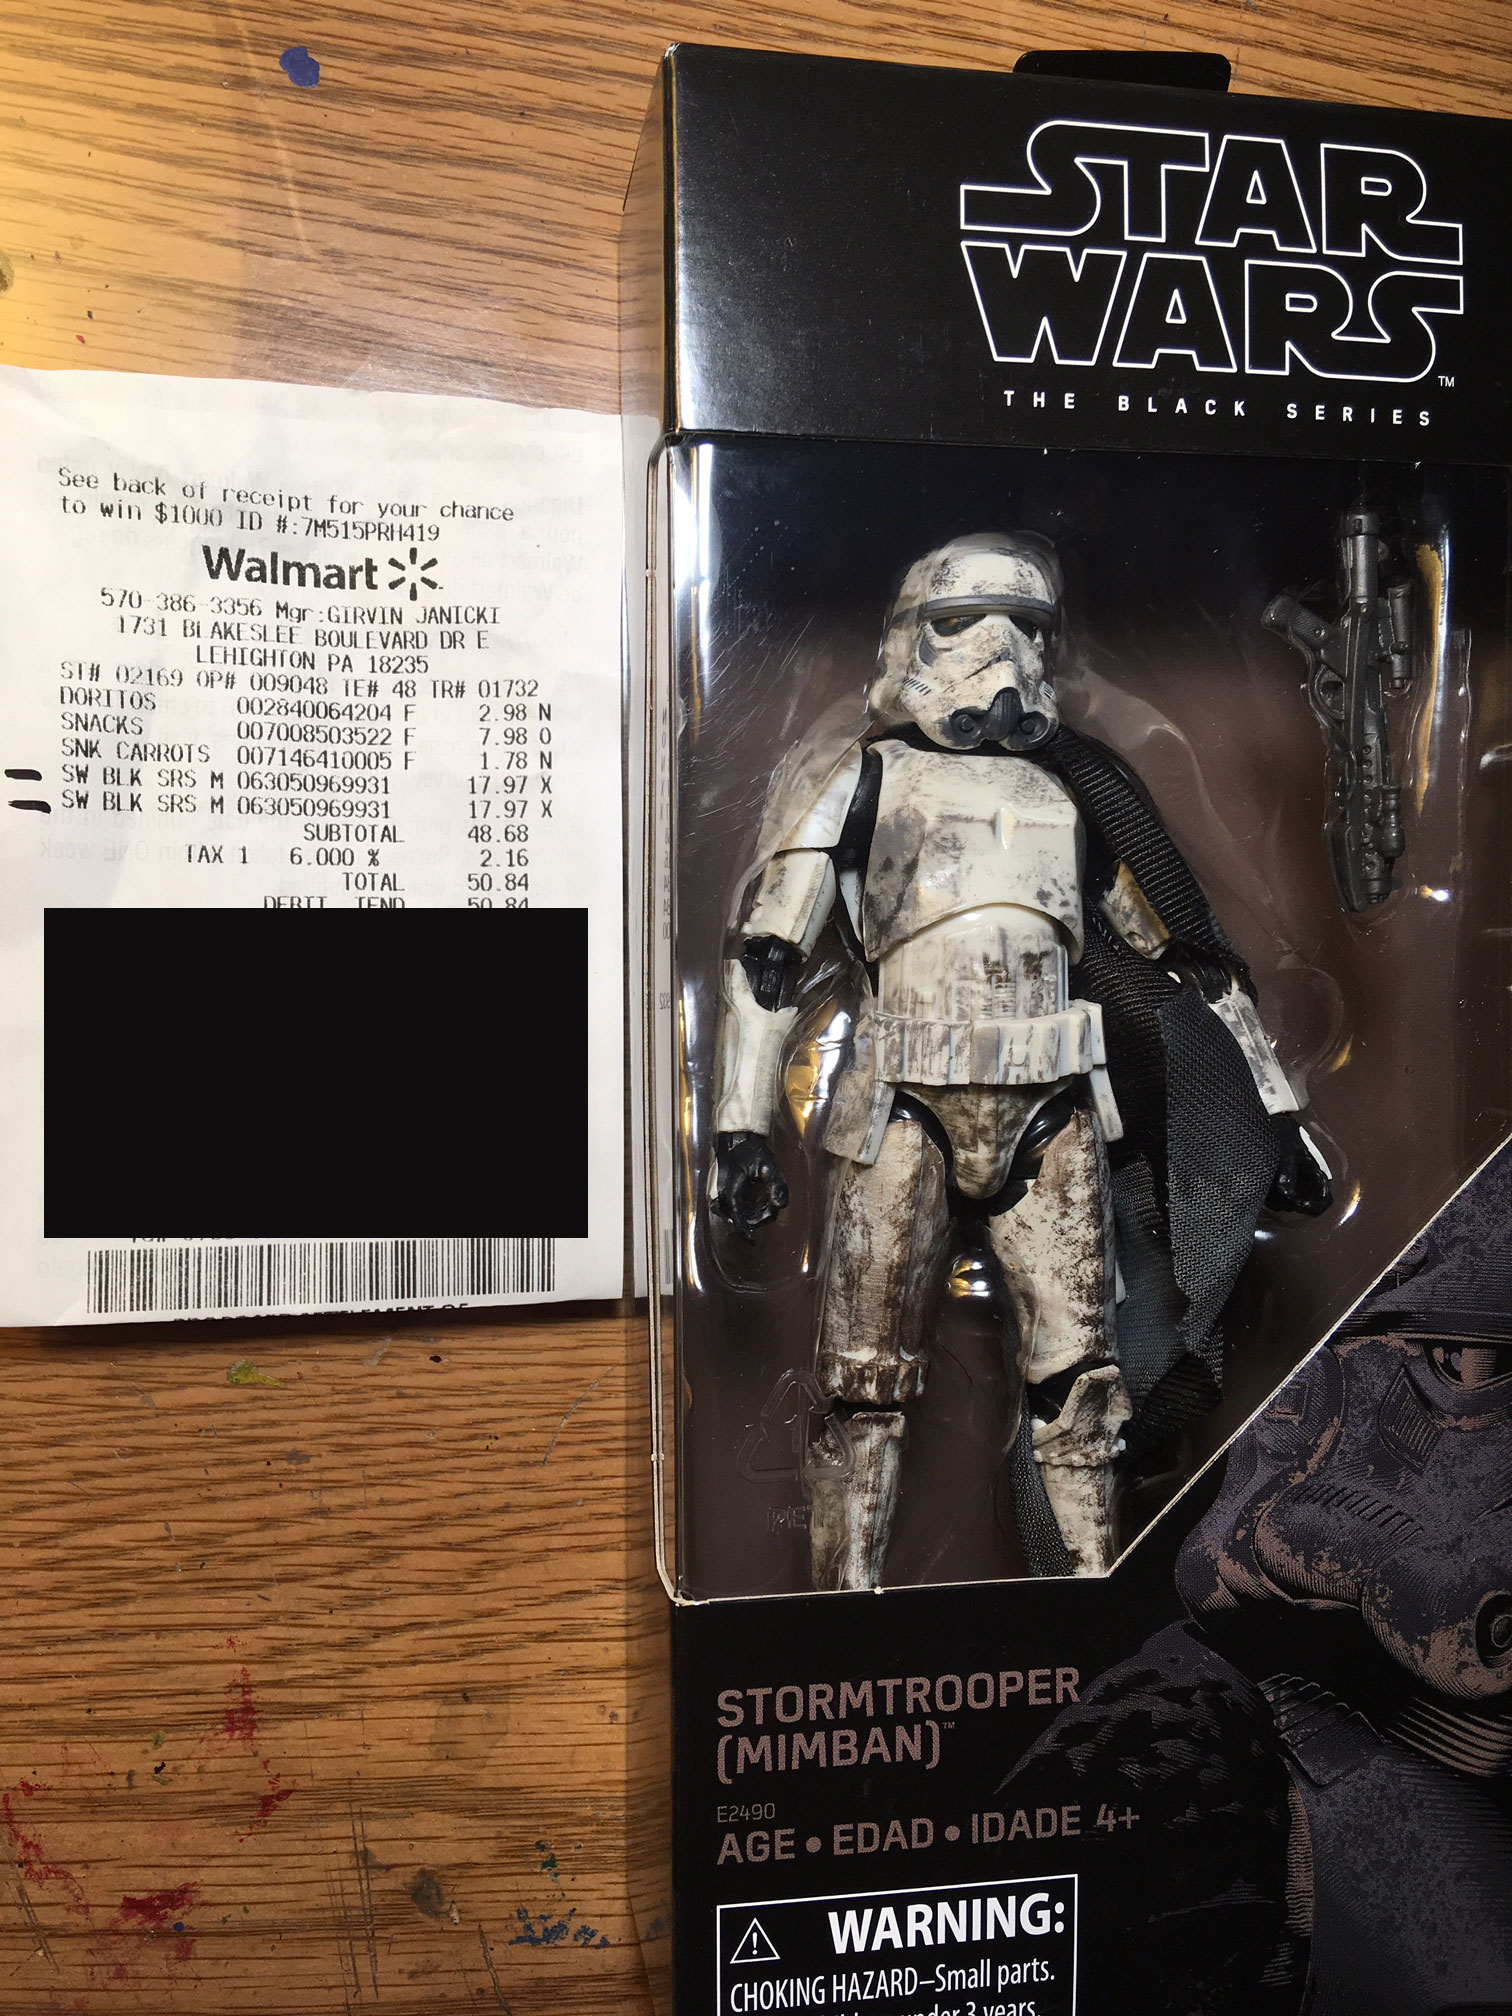 Star Wars Vintage Collection Rogue One Mimban Stormtrooper VC123 Army Builder! 